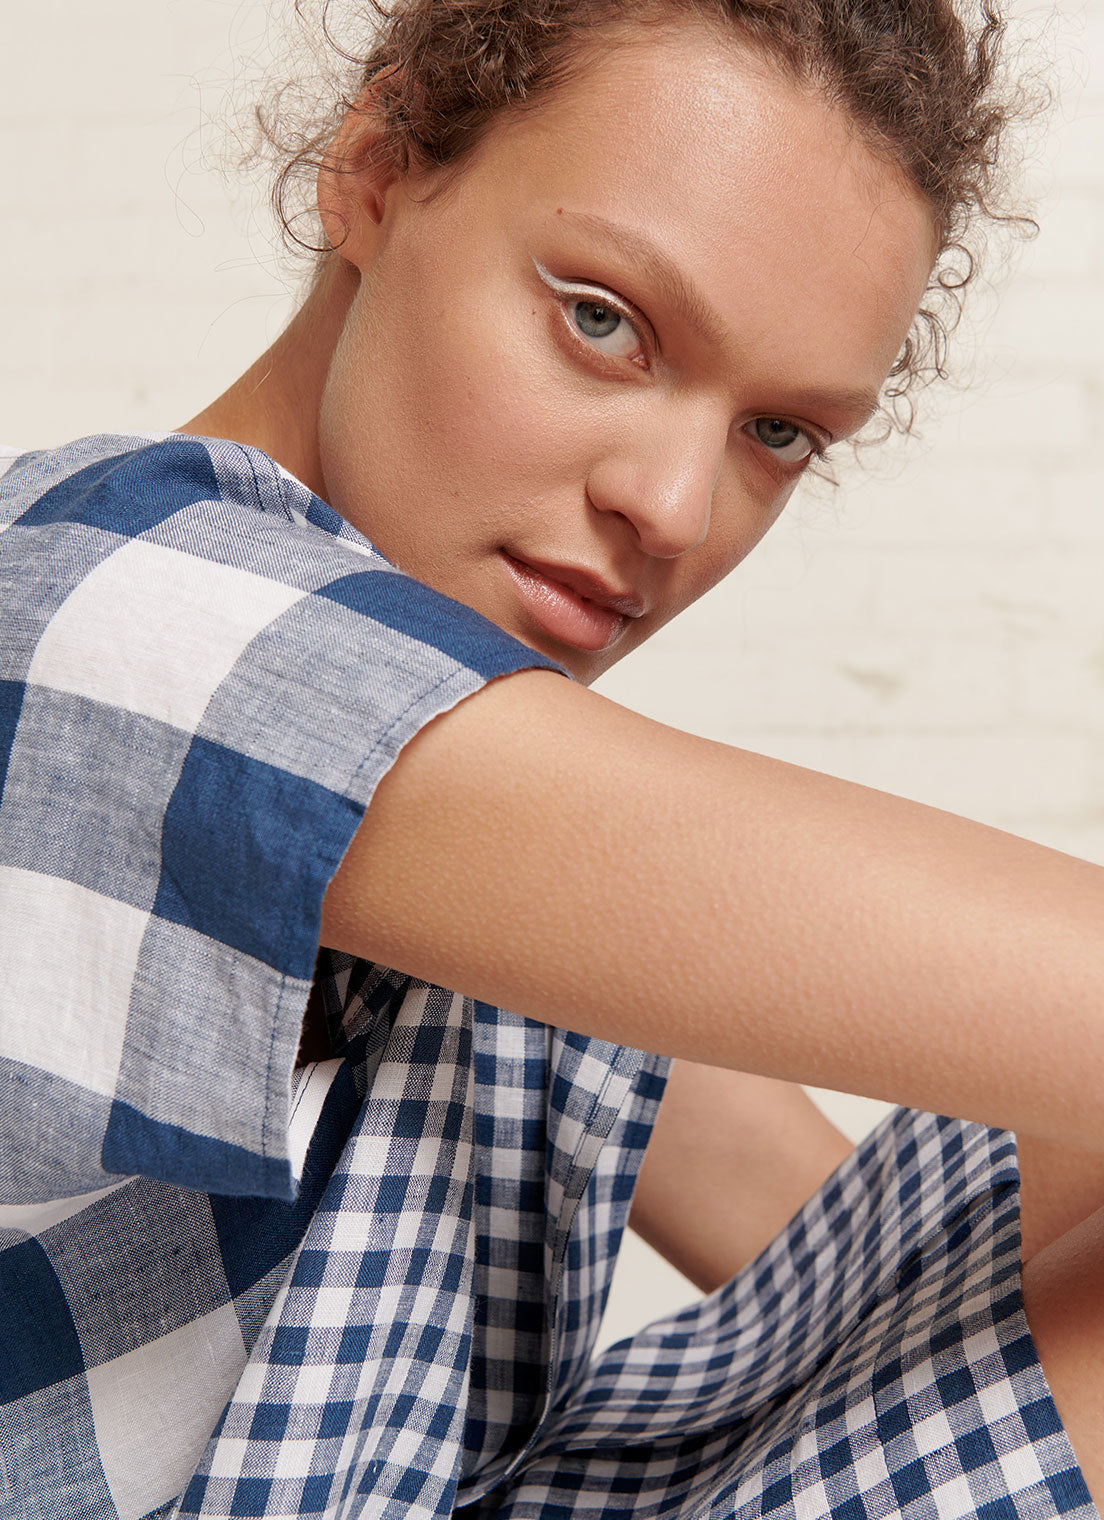 An indigo and white gingham linen dress with short sleeves, open neckline and centre front pleat detail made from mixed gingham yarn dye washed linen